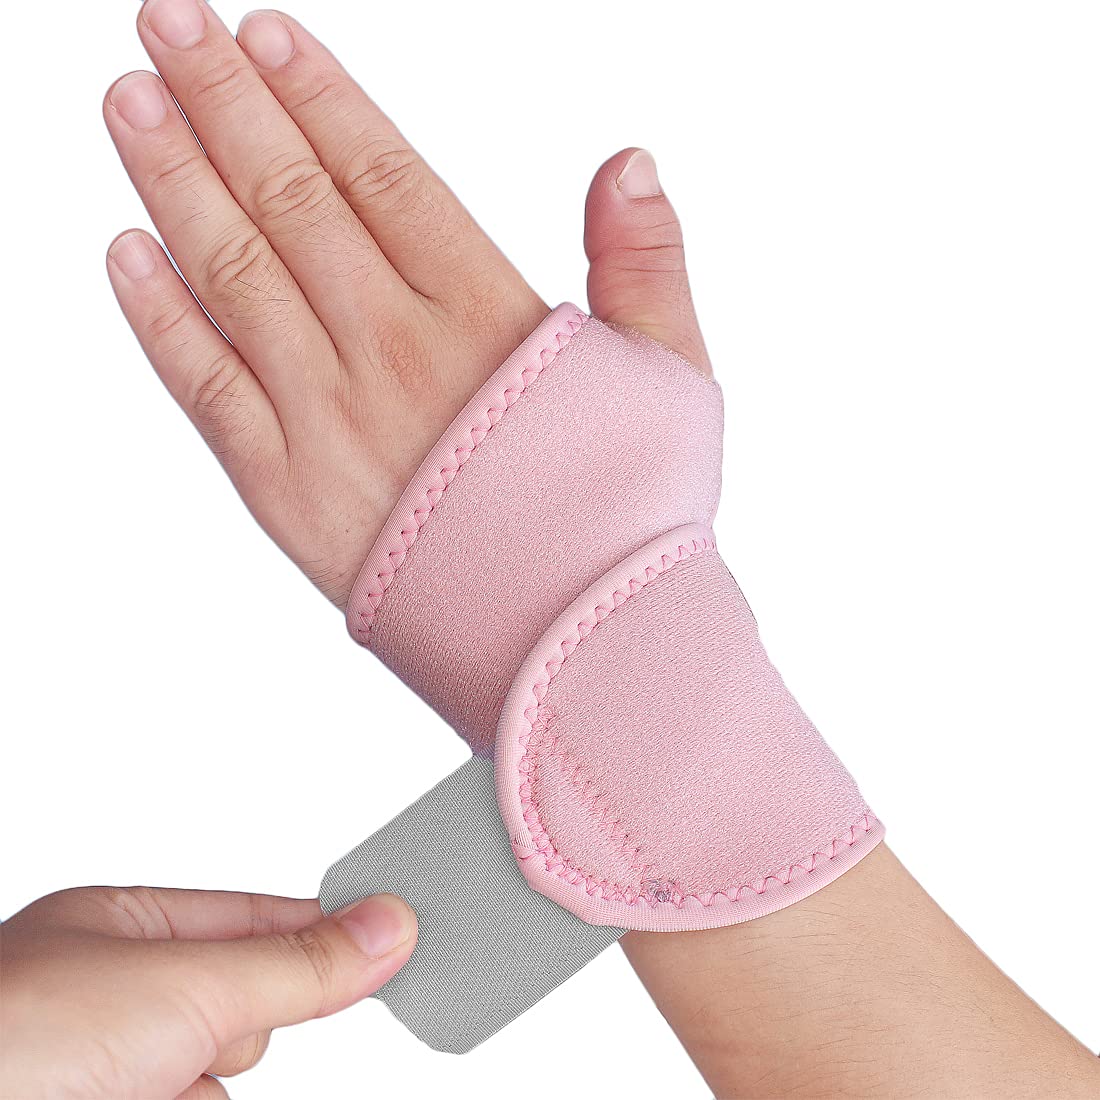 Wrist Support Brace/Carpal Tunnel/Hand Support, Adjustable for Arthritis and Tendinitis, Joint Pain Relief